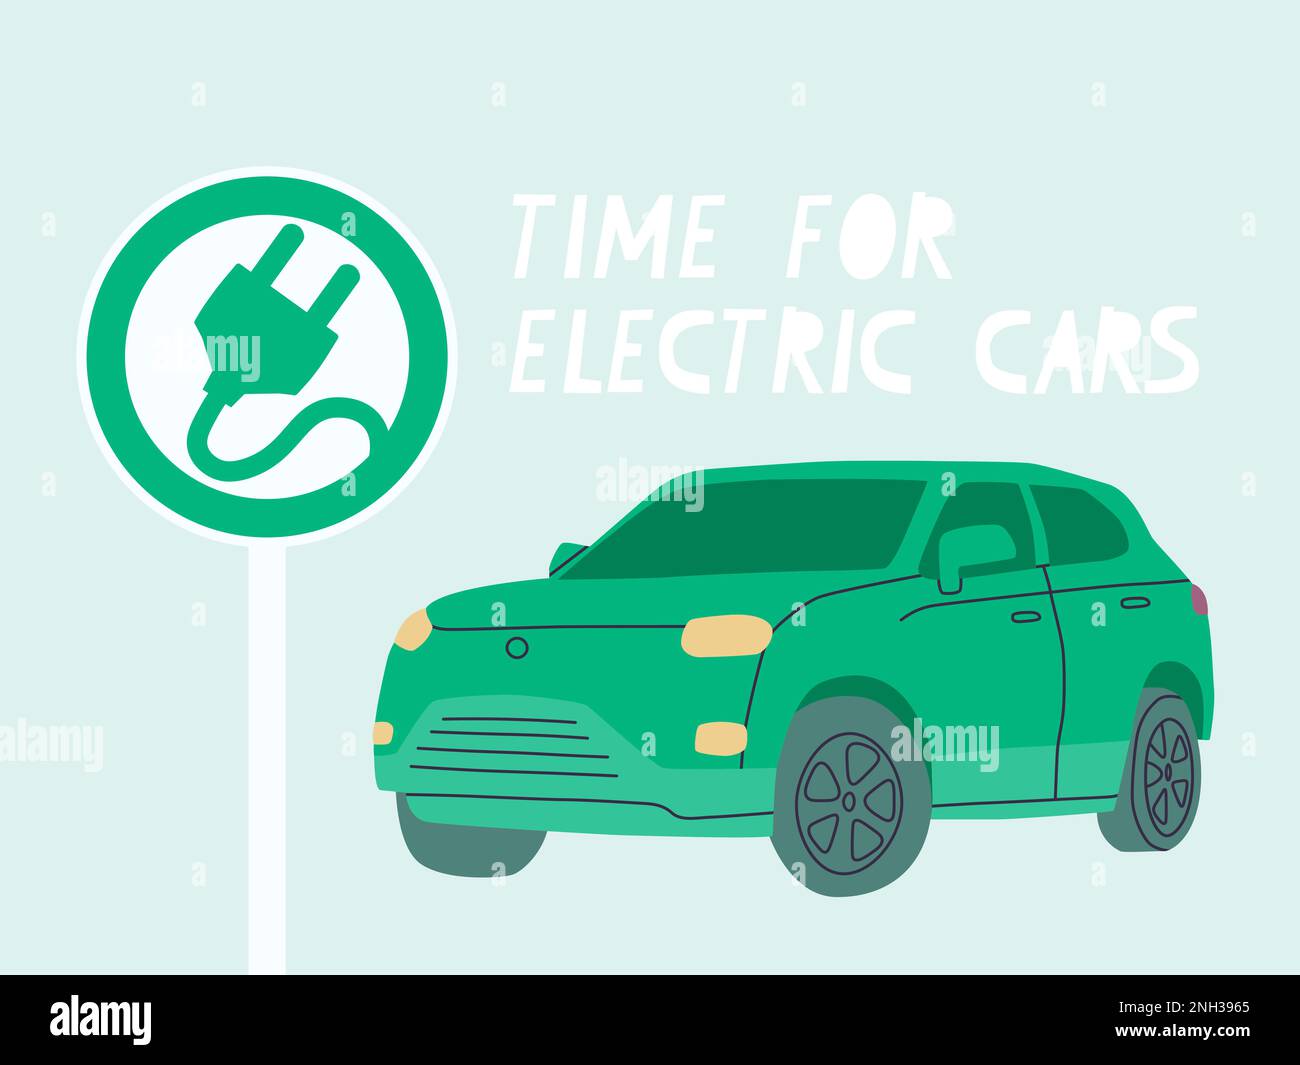 Time for electric cars. Green car. Road sign of the priority of electric vehicles. Vector flat illustration of petrol and diesel car ban in Europe. Stock Vector